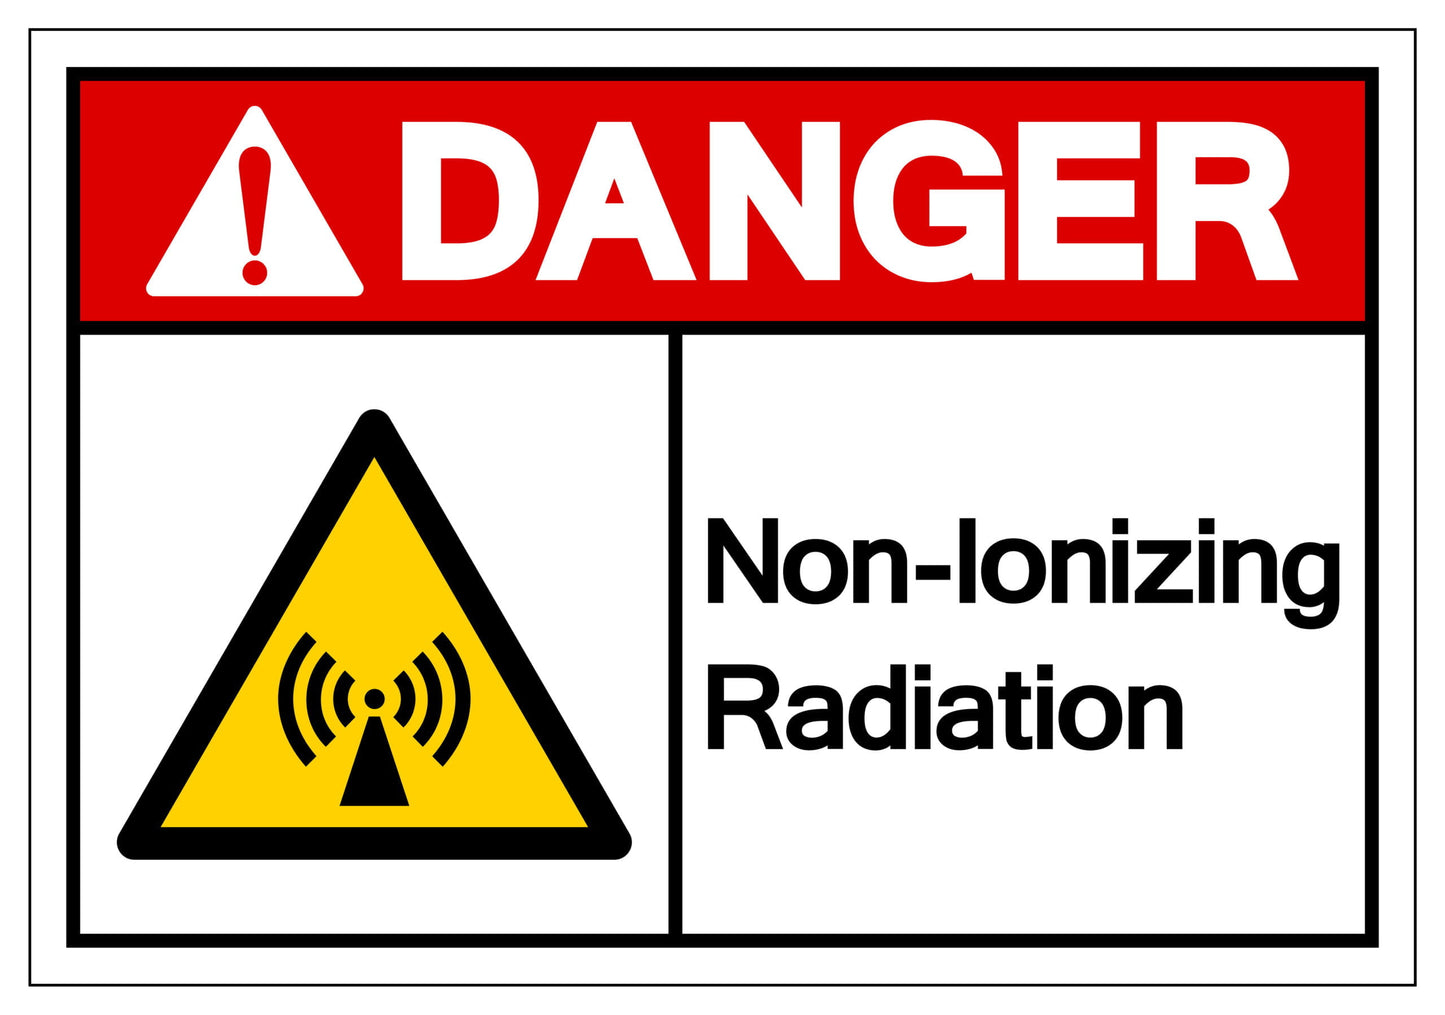 Image of a sign that says Danger: Non-Ionizing Radiation